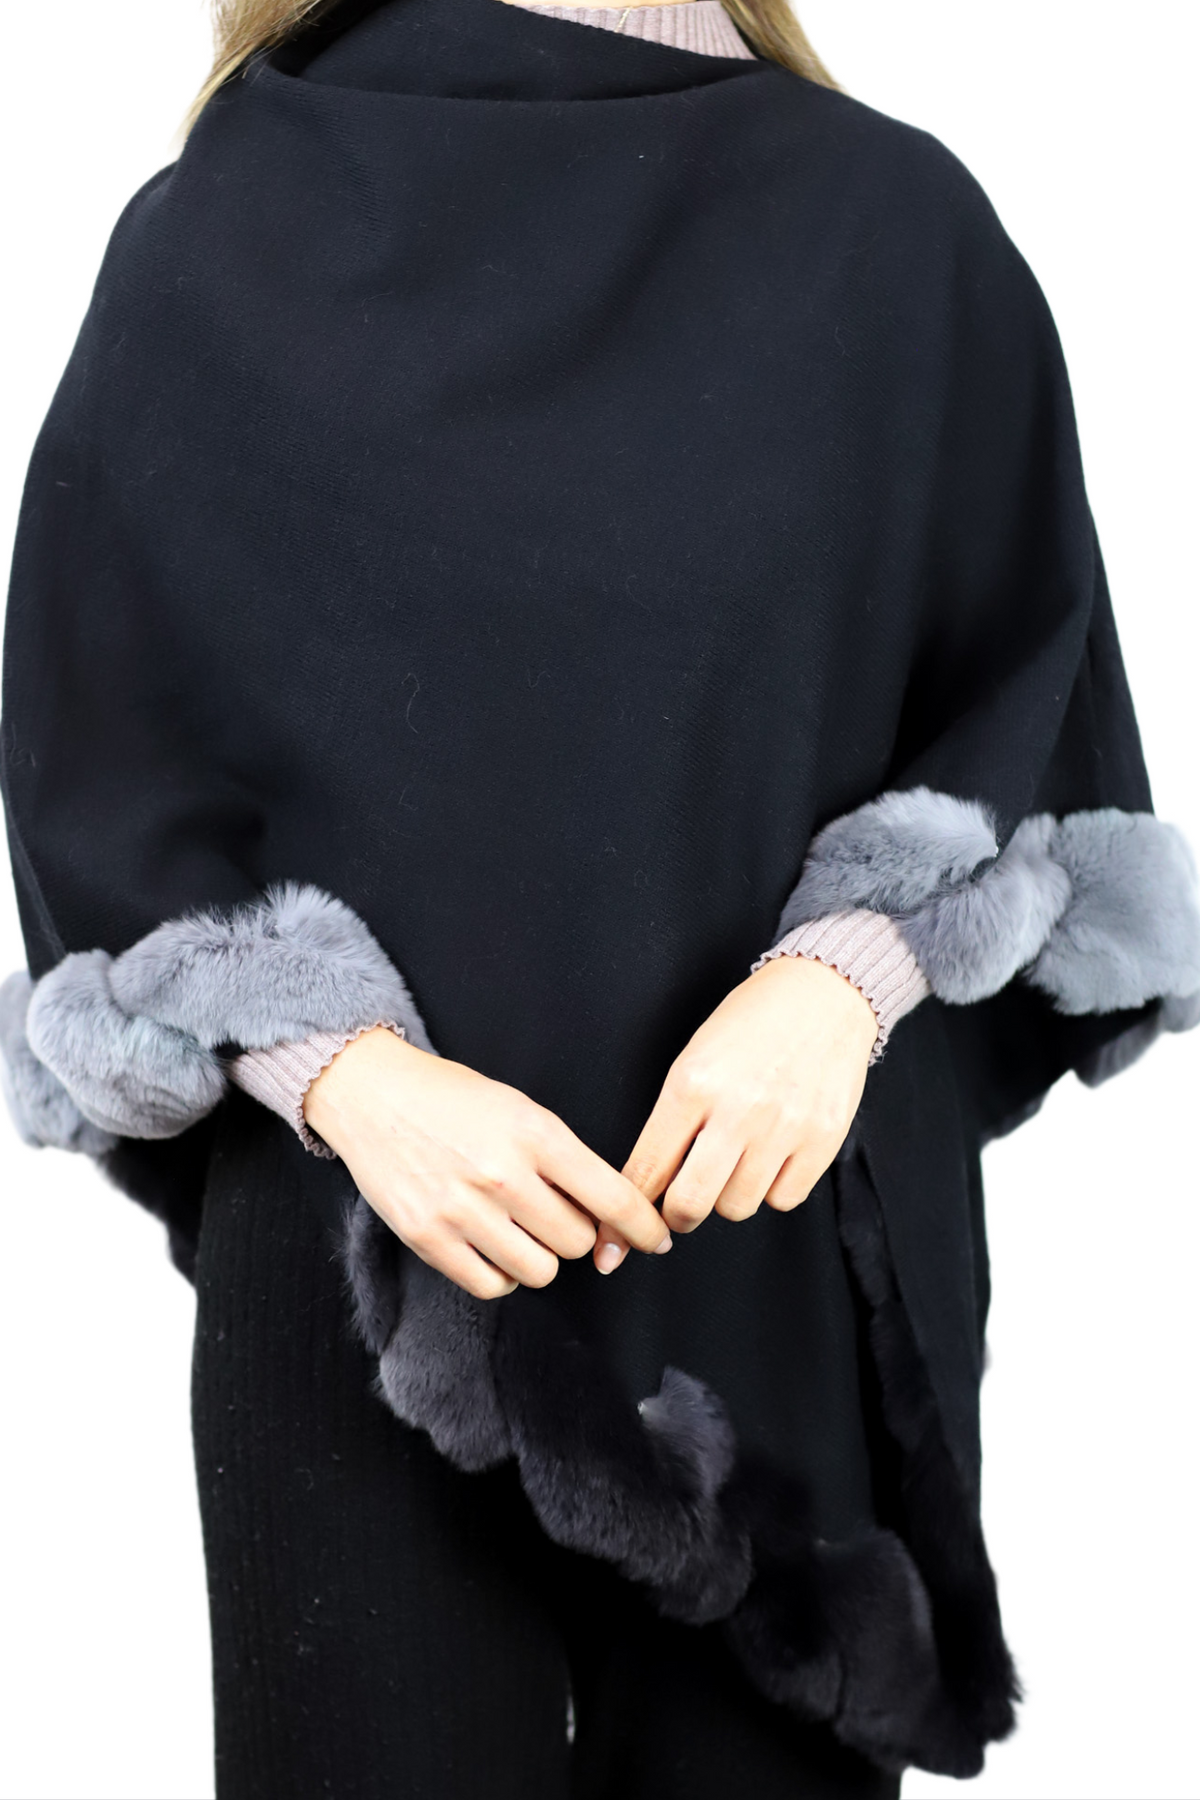 JAYLEY Grey Faux Fur Scarf with Pearl Detail Size: One Size Grey One Size JAYLEY